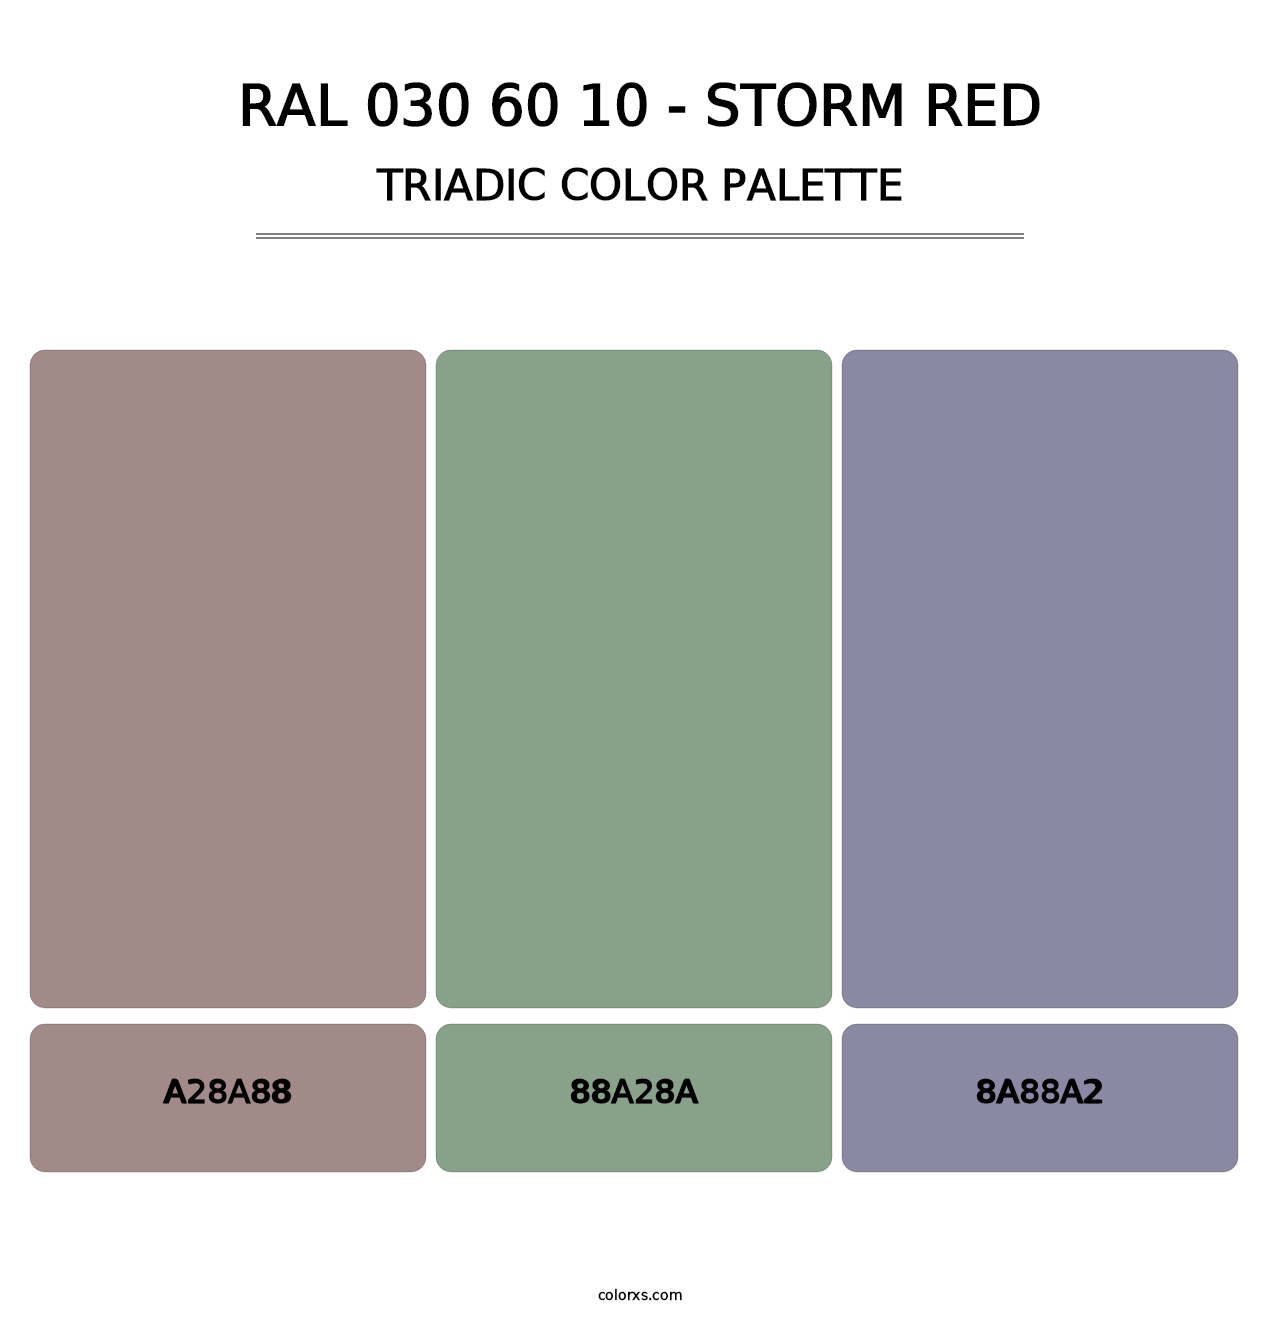 RAL 030 60 10 - Storm Red - Triadic Color Palette